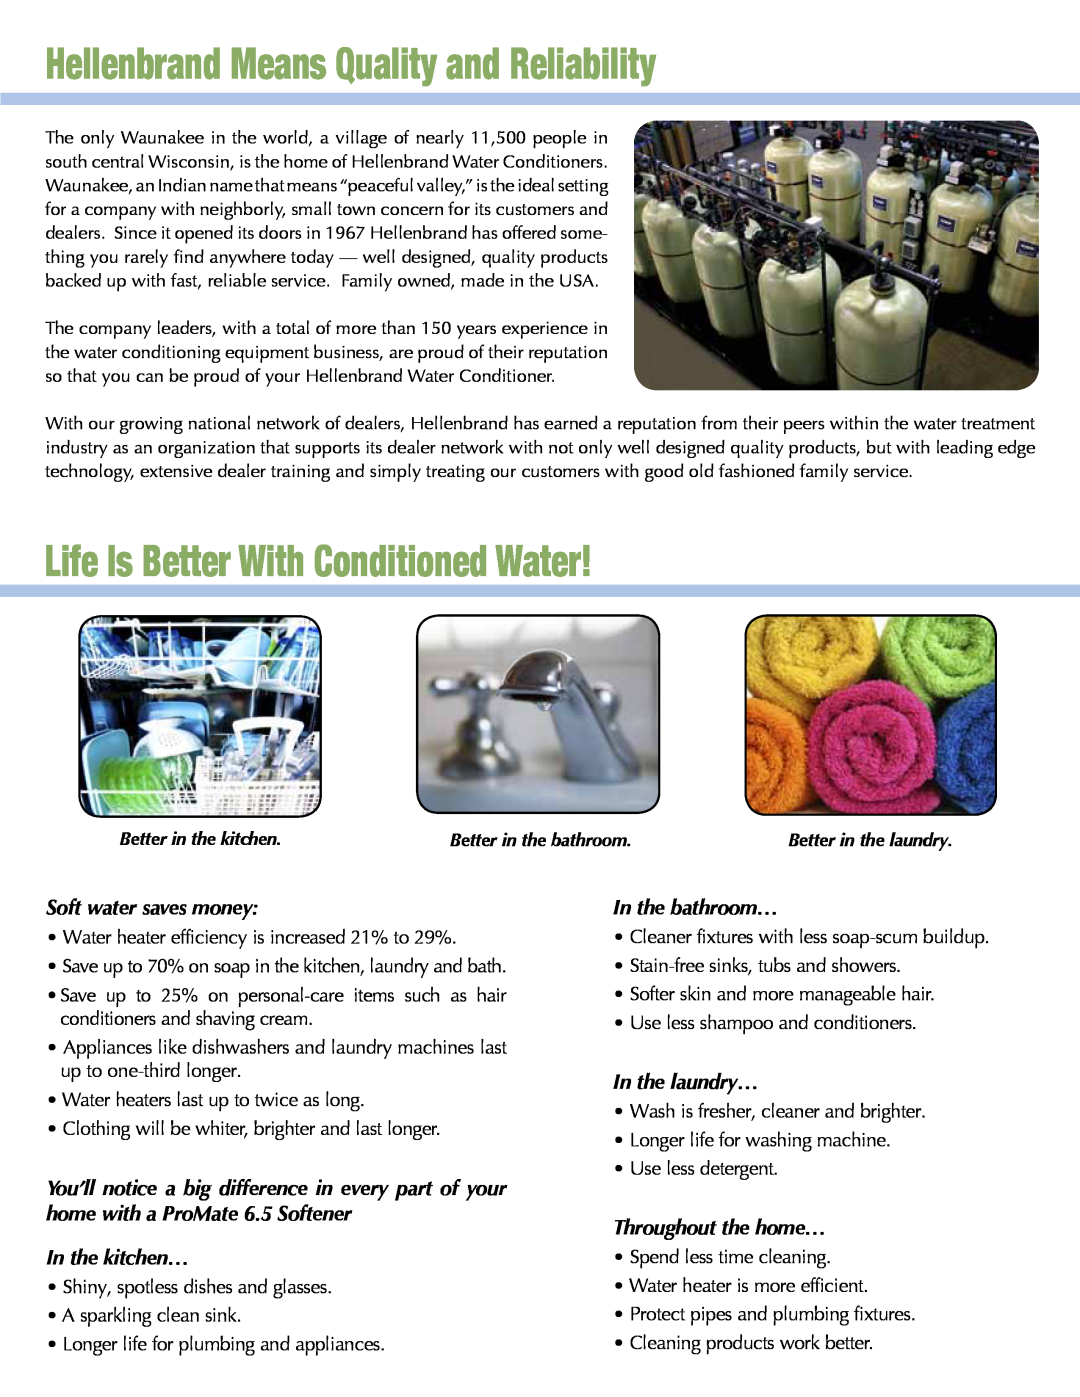 Hellenbrand 6.5 Hellenbrand Means Quality and Reliability, Life Is Better With Conditioned Water, Soft water saves money 